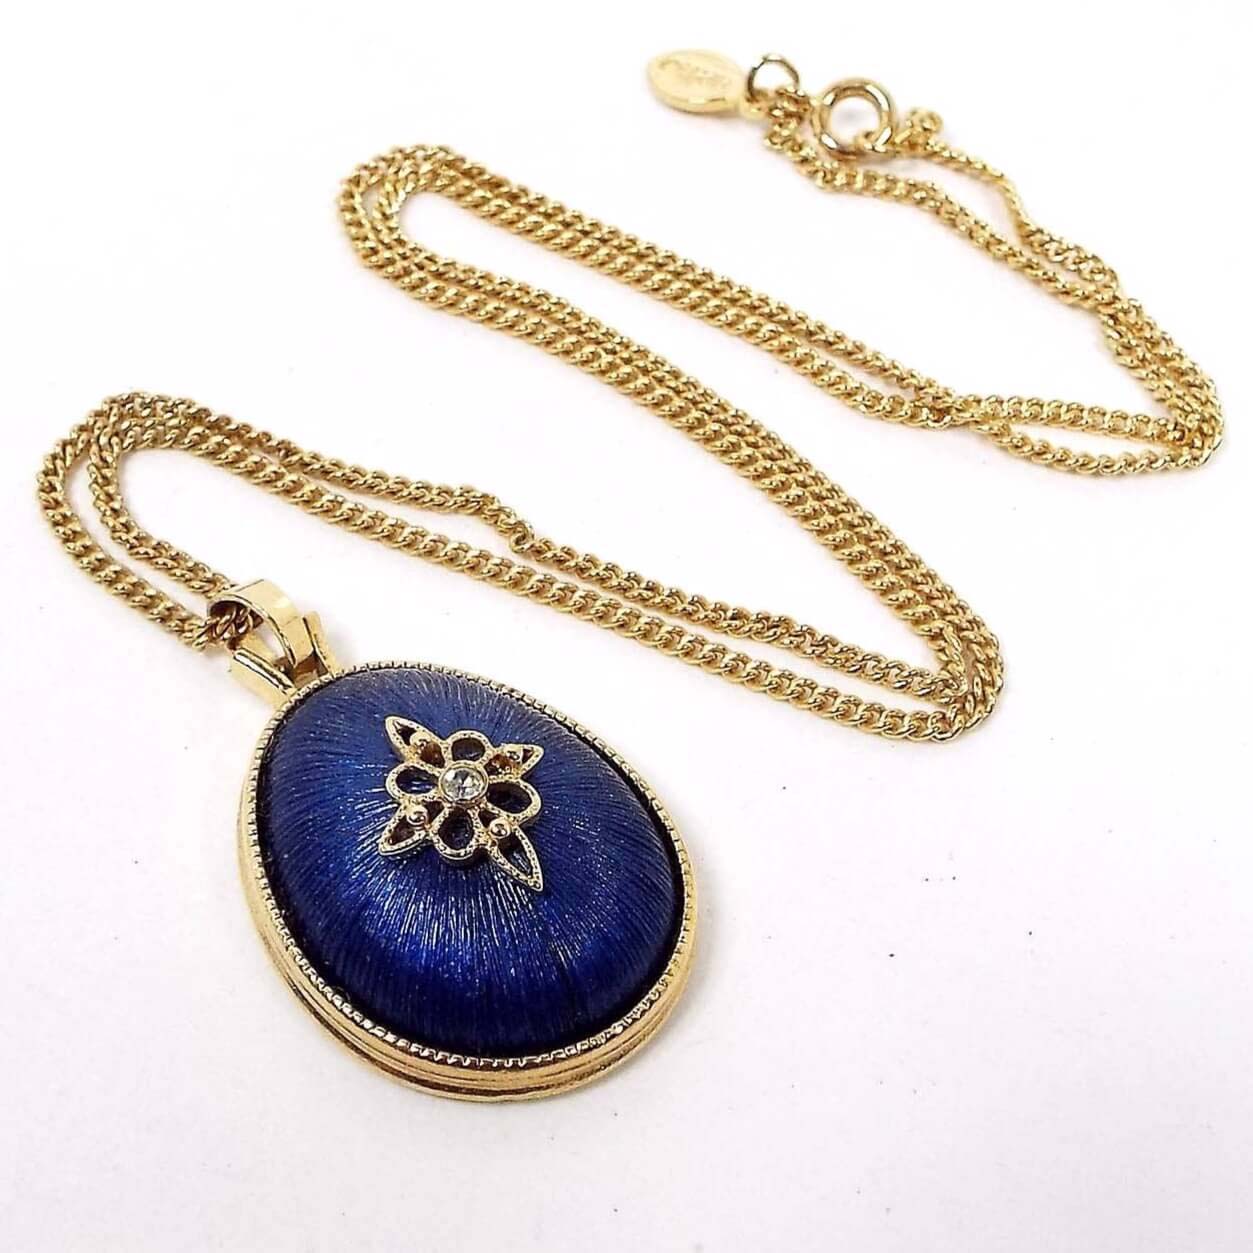 Front view of the retro vintage Avon pendant necklace. The metal is gold tone in color. The pendant is tear drop shaped with blue plastic cab and a rhinestone in the middle of a gold tone star shape. 